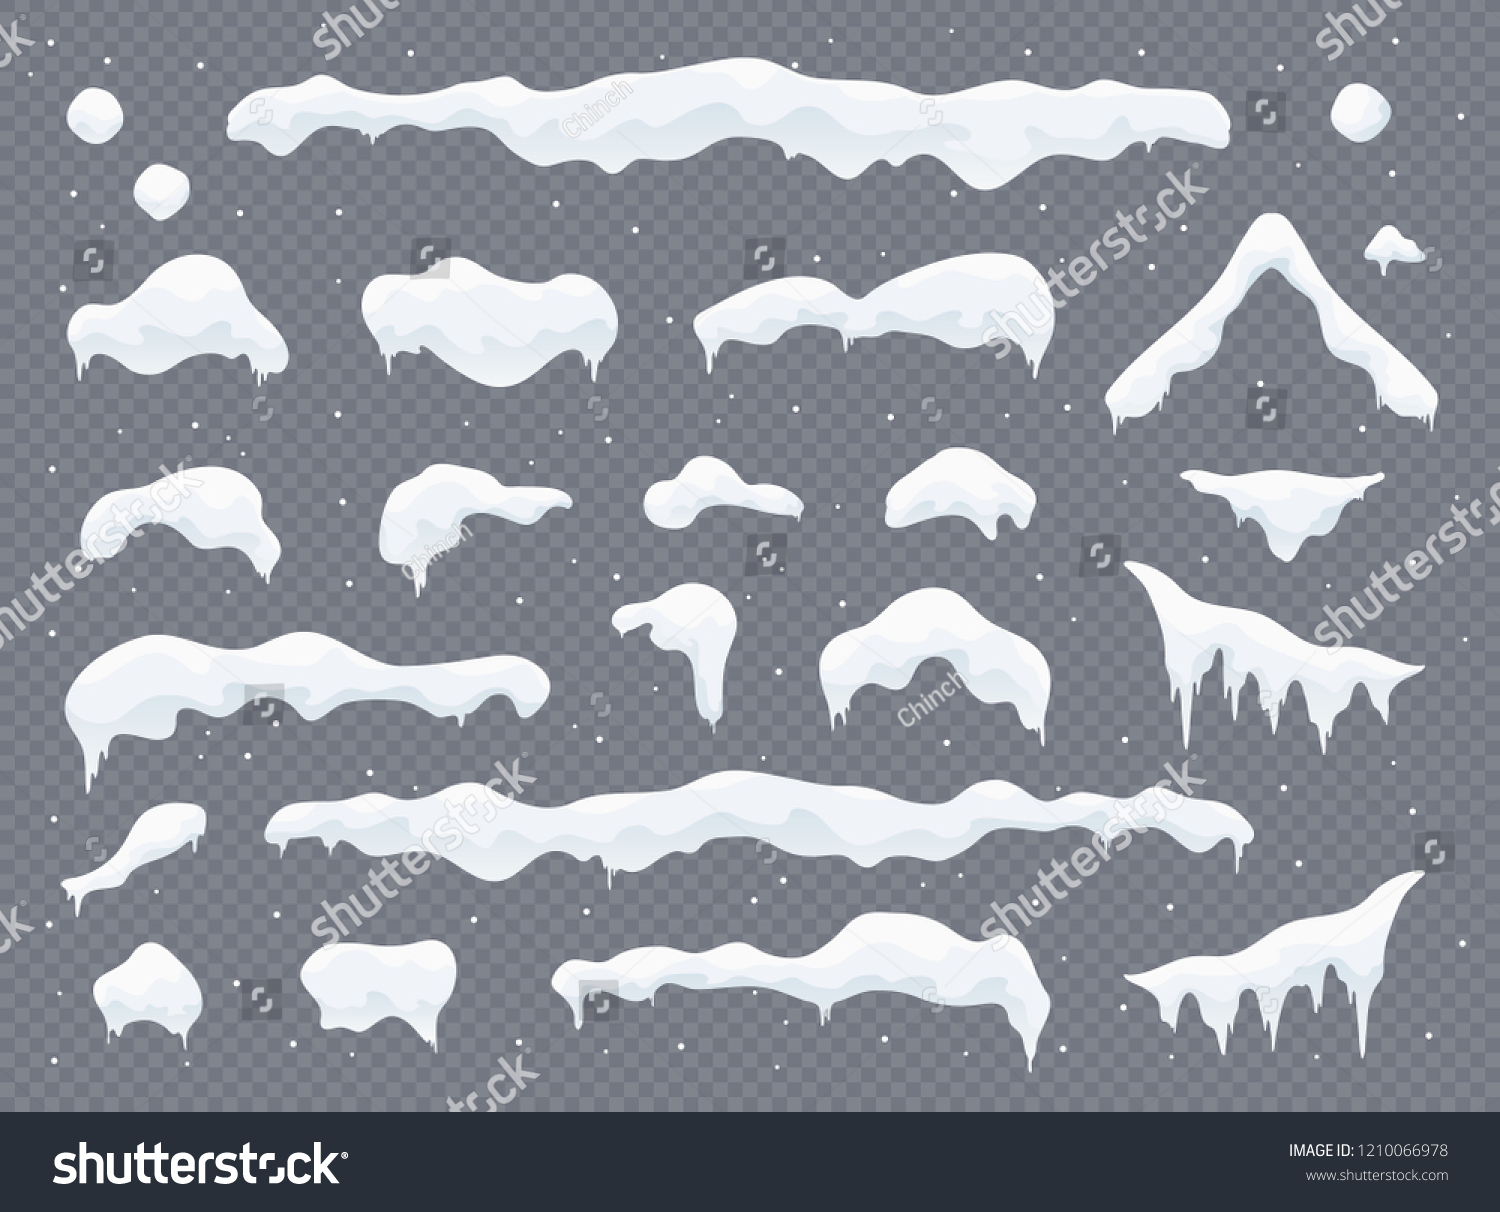 Snow caps, snowballs and snowdrifts set. Snow cap vector collection. Winter decoration element. Snowy elements on winter background. Cartoon template. Snowfall and snowflakes in motion. Illustration. #1210066978